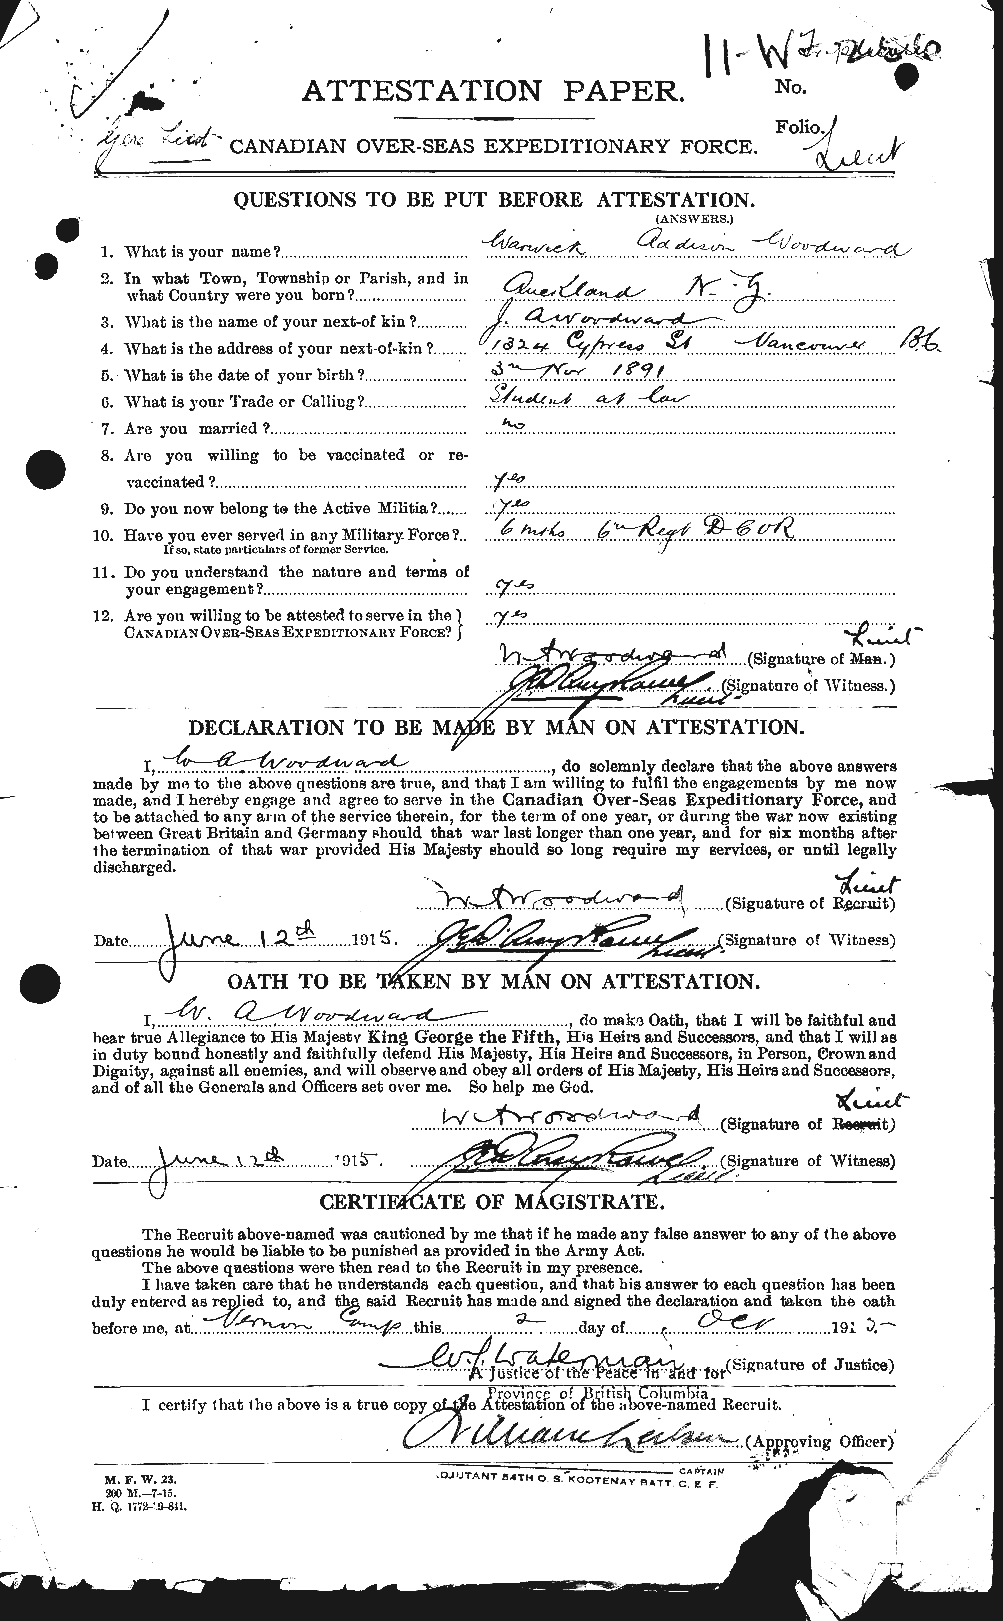 Personnel Records of the First World War - CEF 684878a